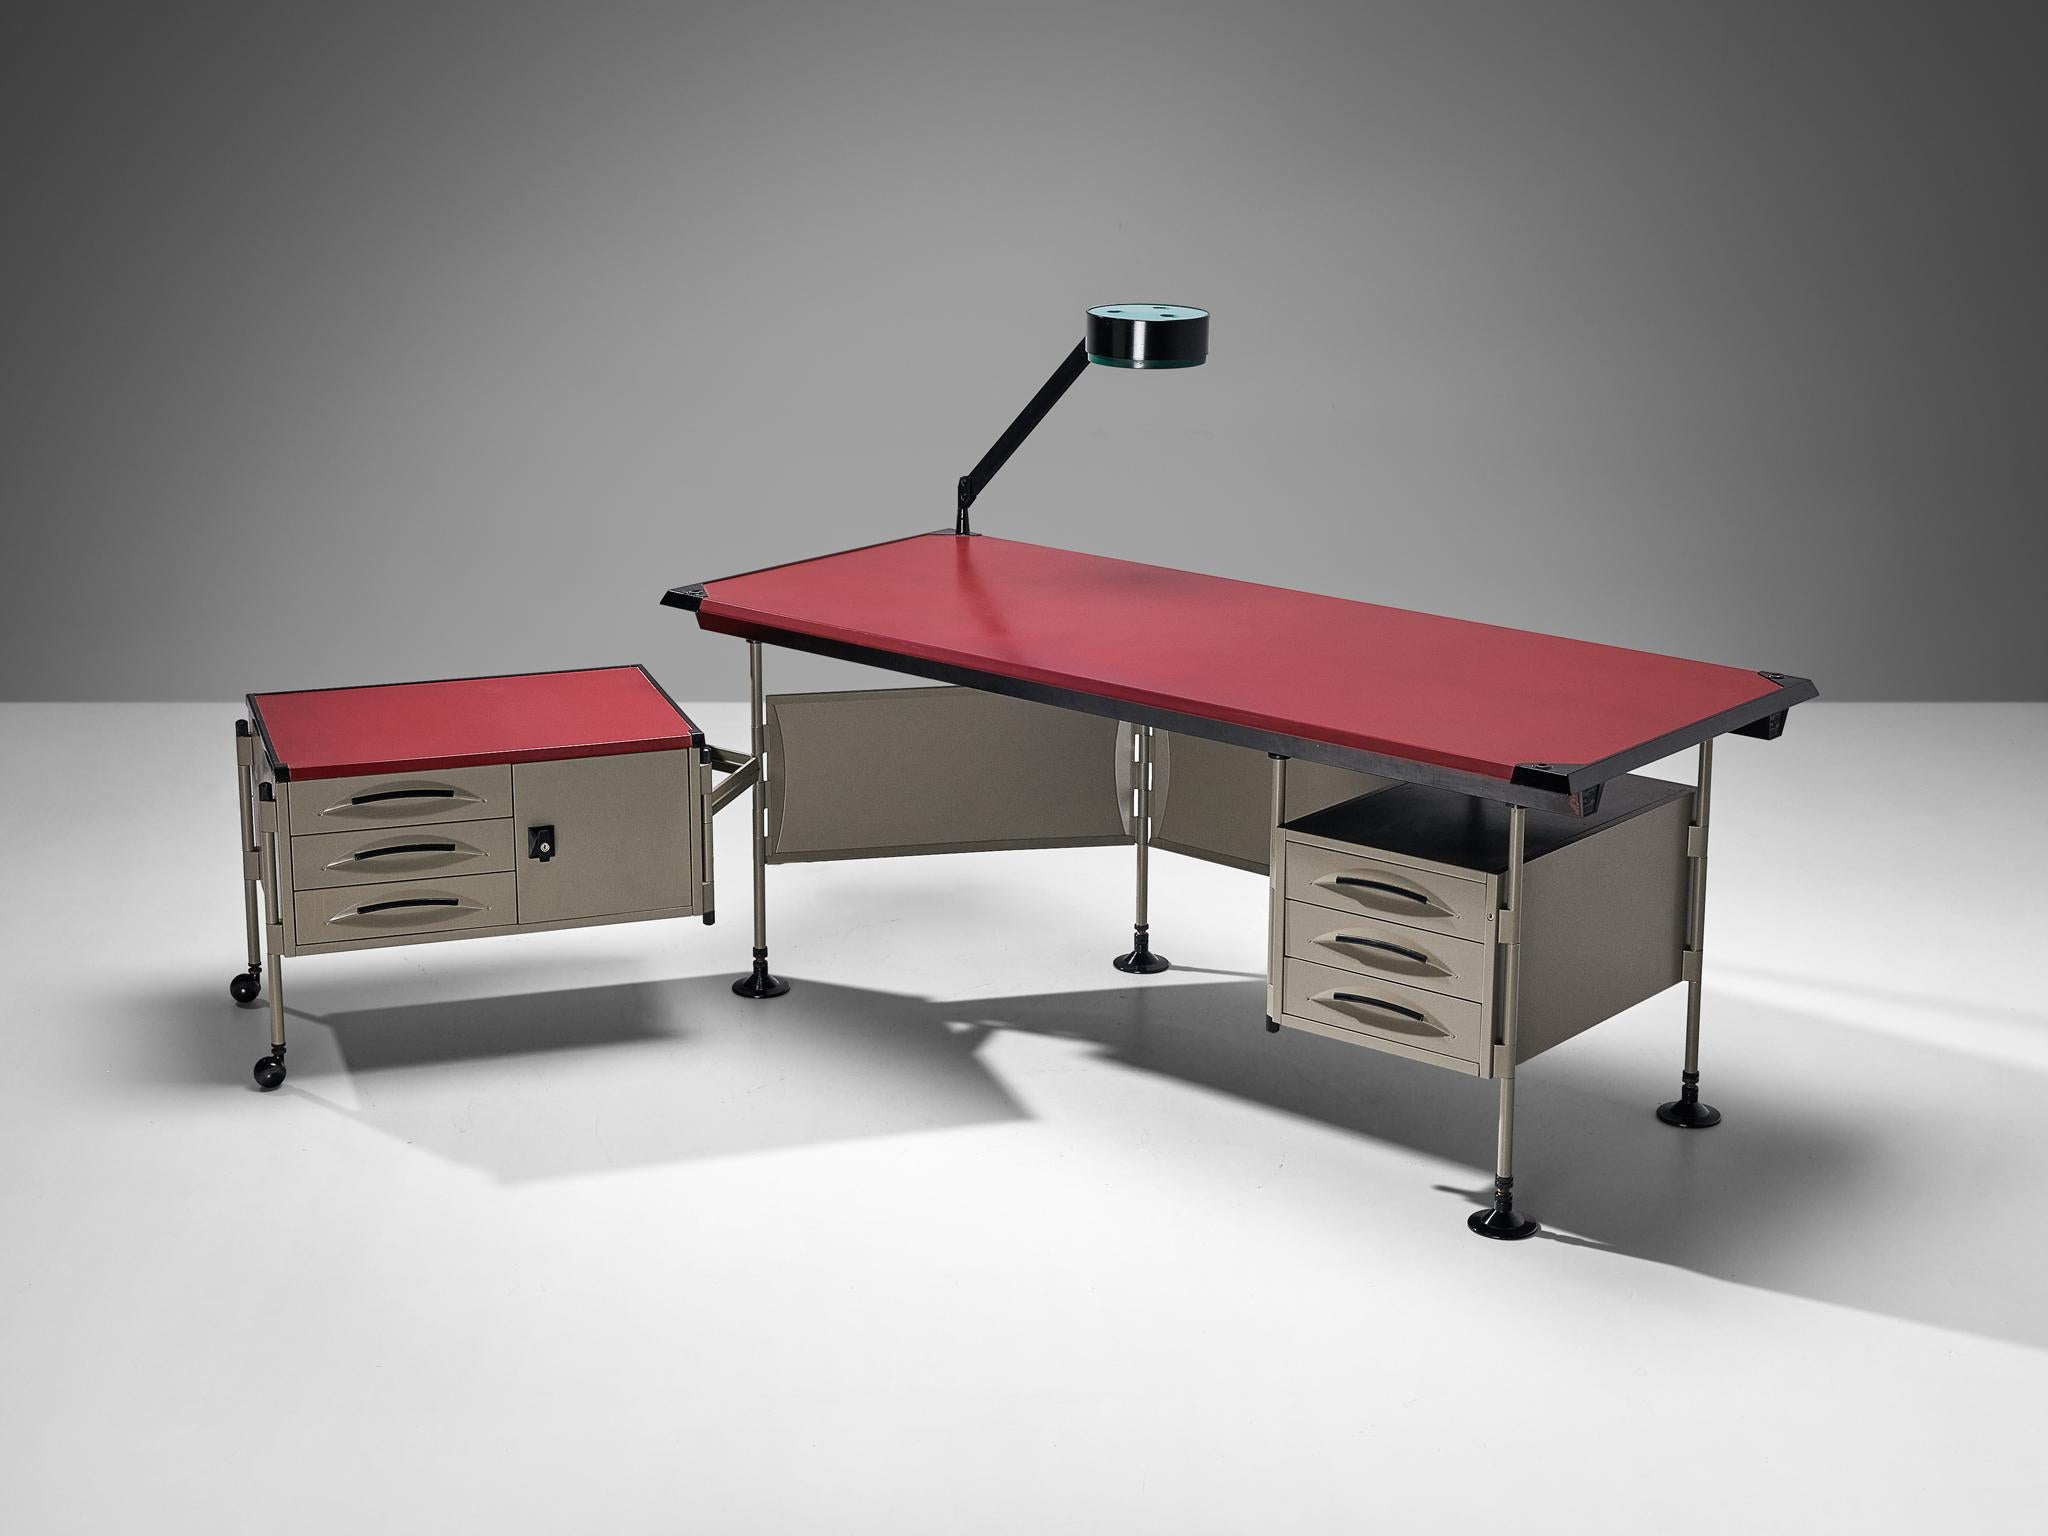 Studio BBPR for Olivetti, 'Spazio' corner/writing desk, coated steel, plastic, vinyl, Italy, design 1959/60, production 1960s.

In 1954, Olivetti, the Italian office equipment manufacturer, hired BBPR to design their New York showroom on Fifth